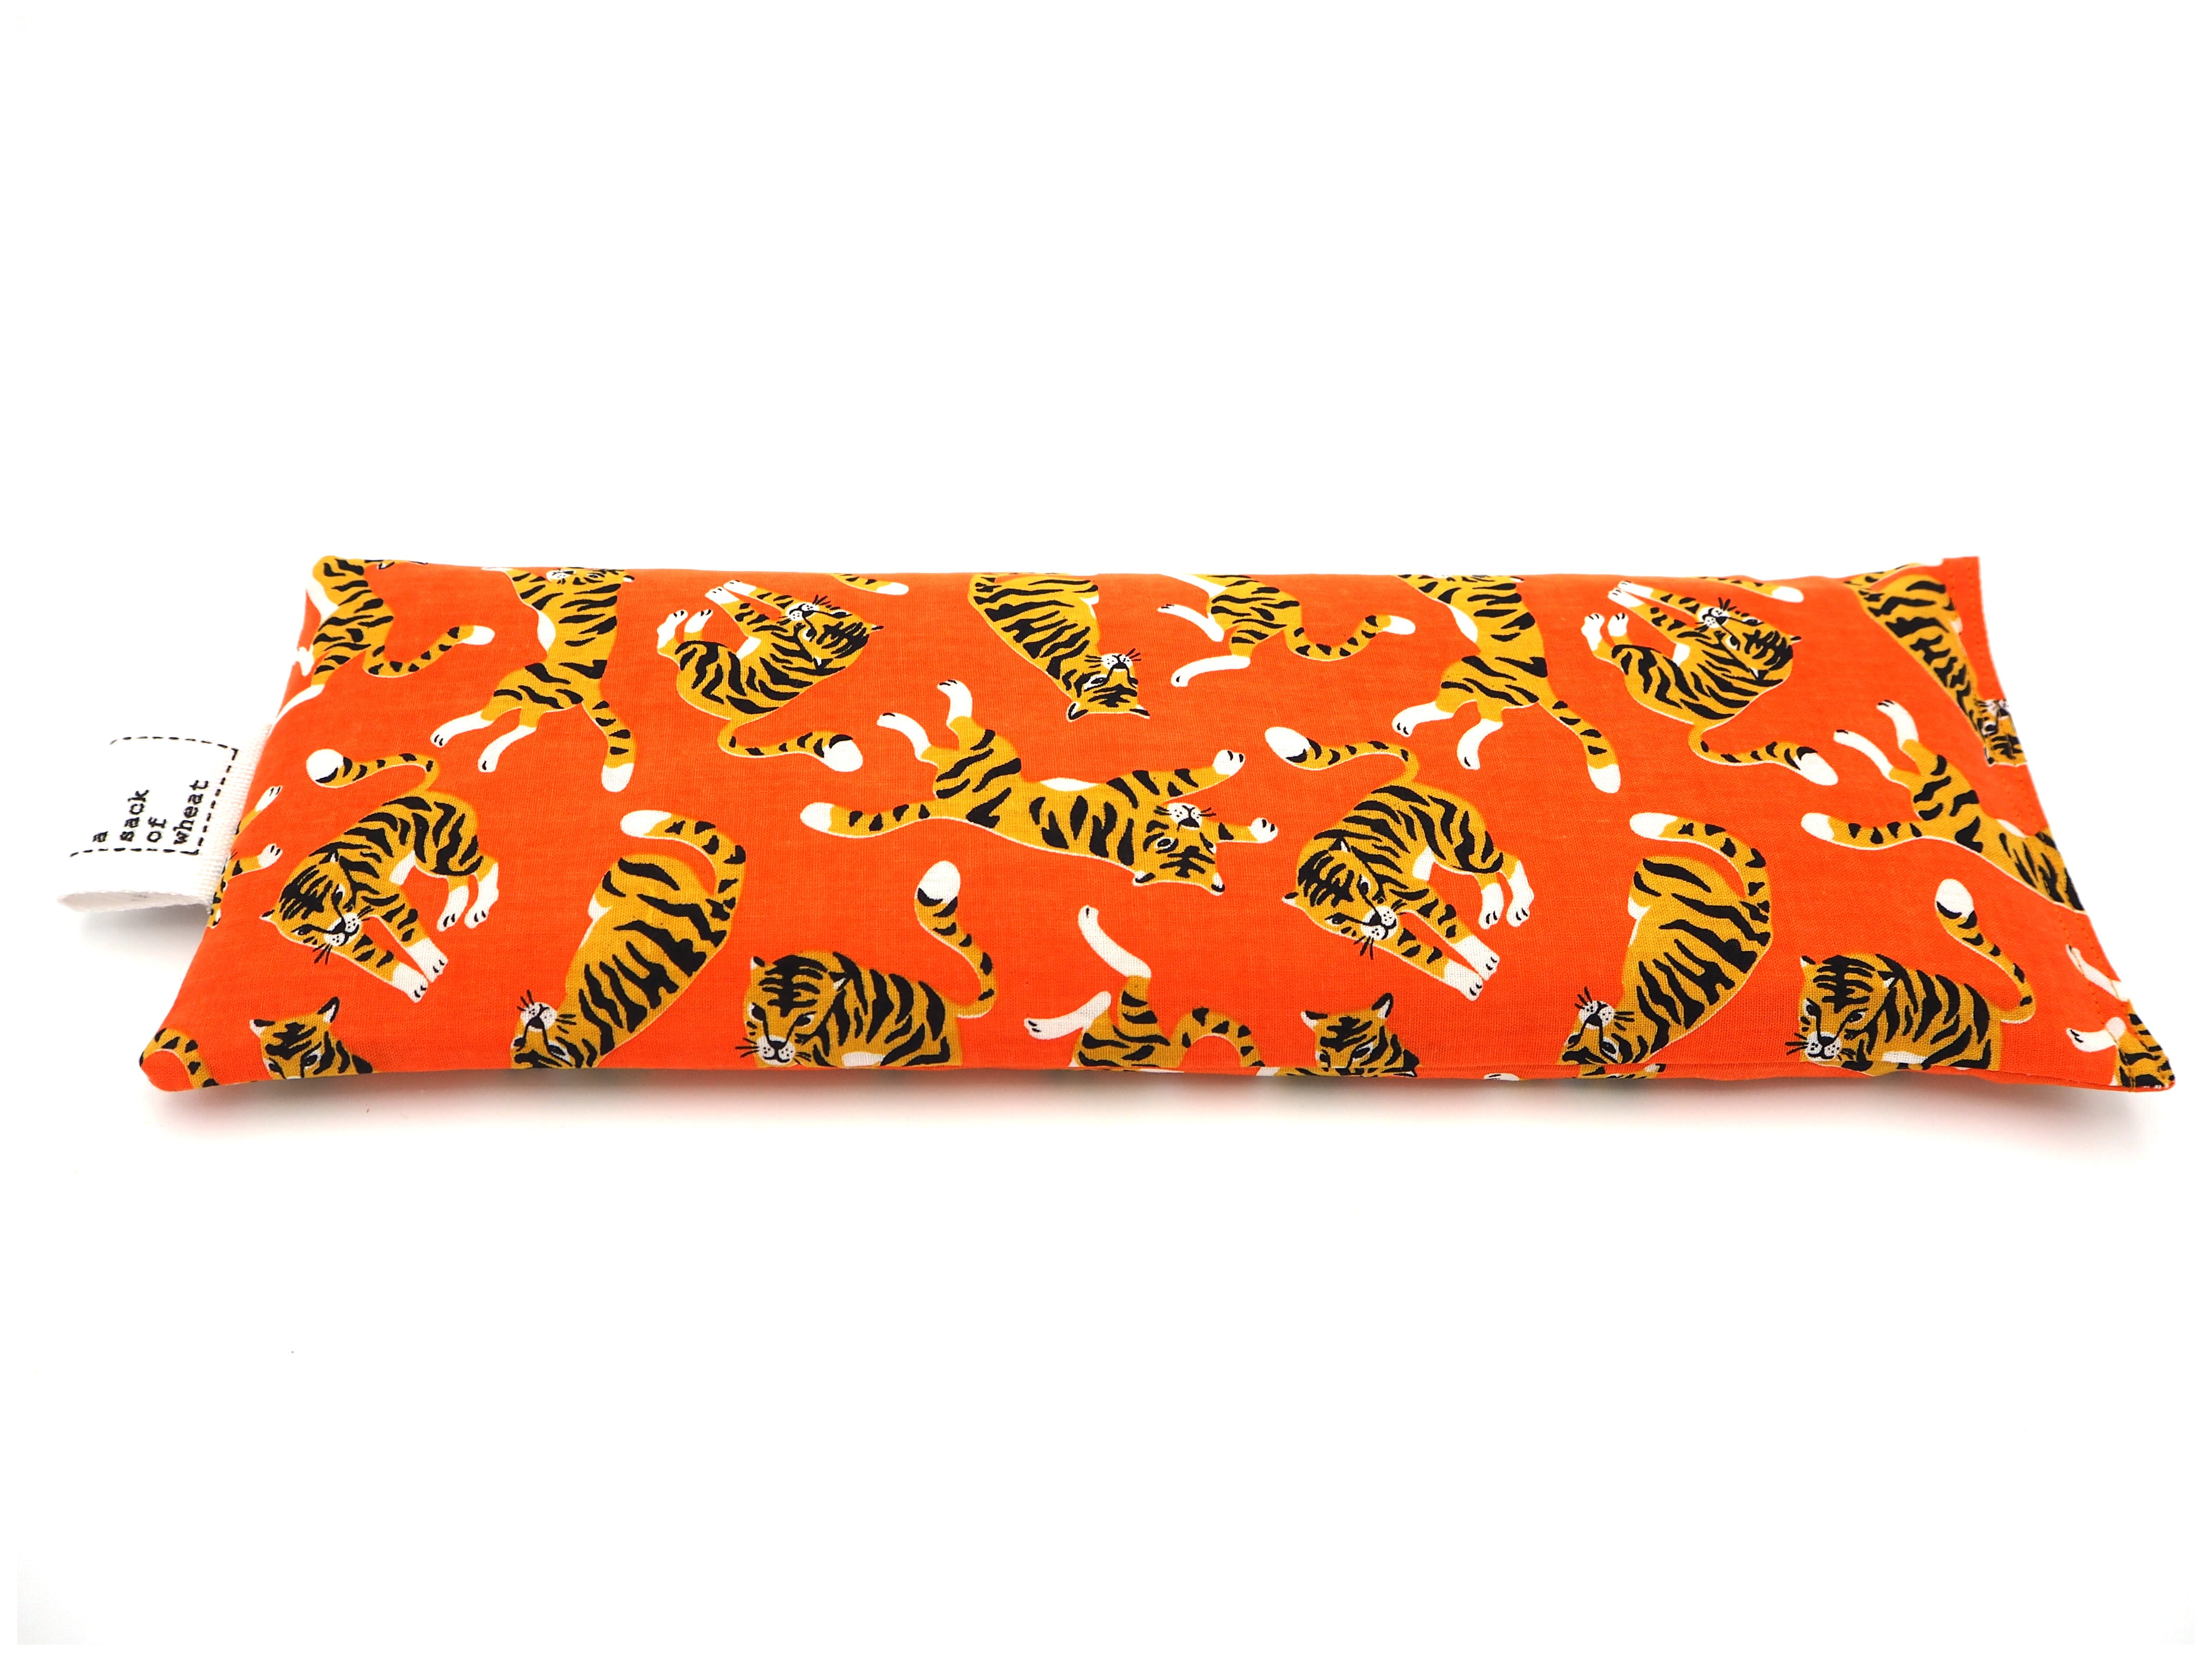 Flat view of A Sack Of Wheat, featuring  colorful tigers on bright orange fabric. 100% cotton fabric.